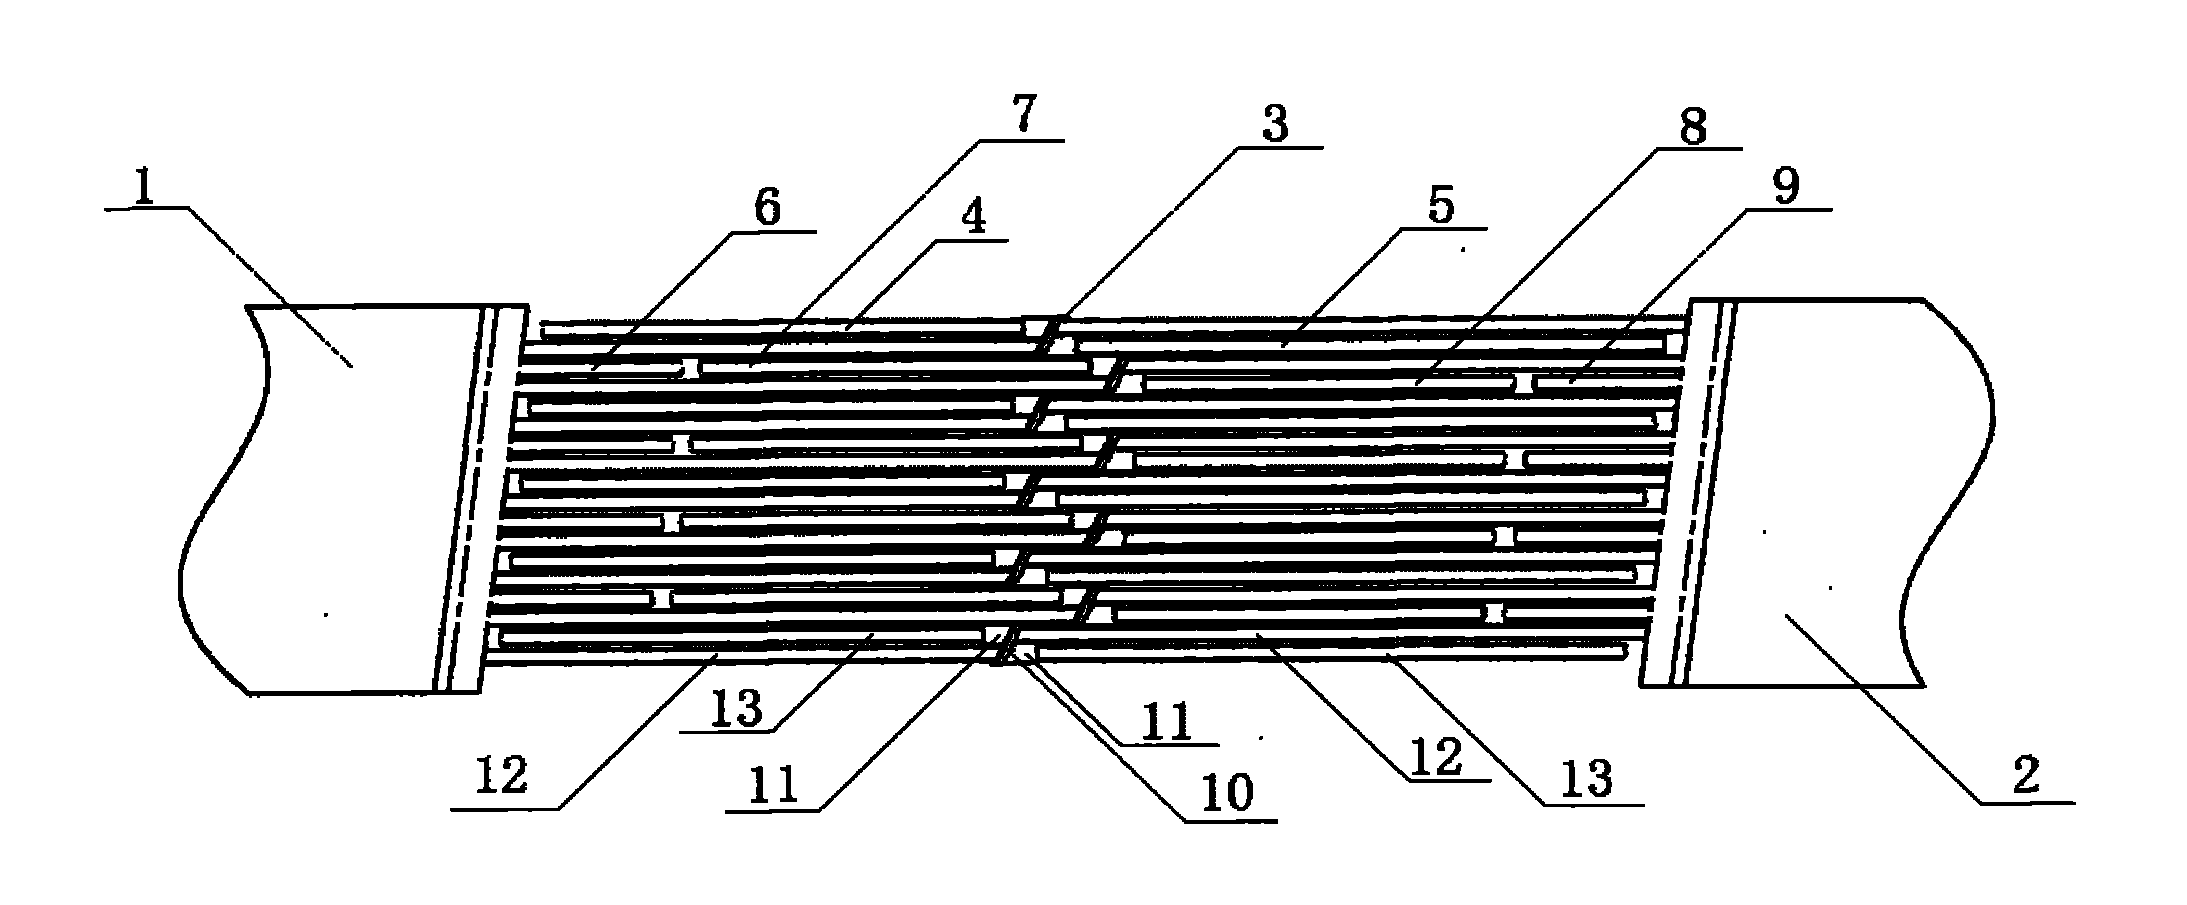 Novel method for configuring and connecting steel ropes